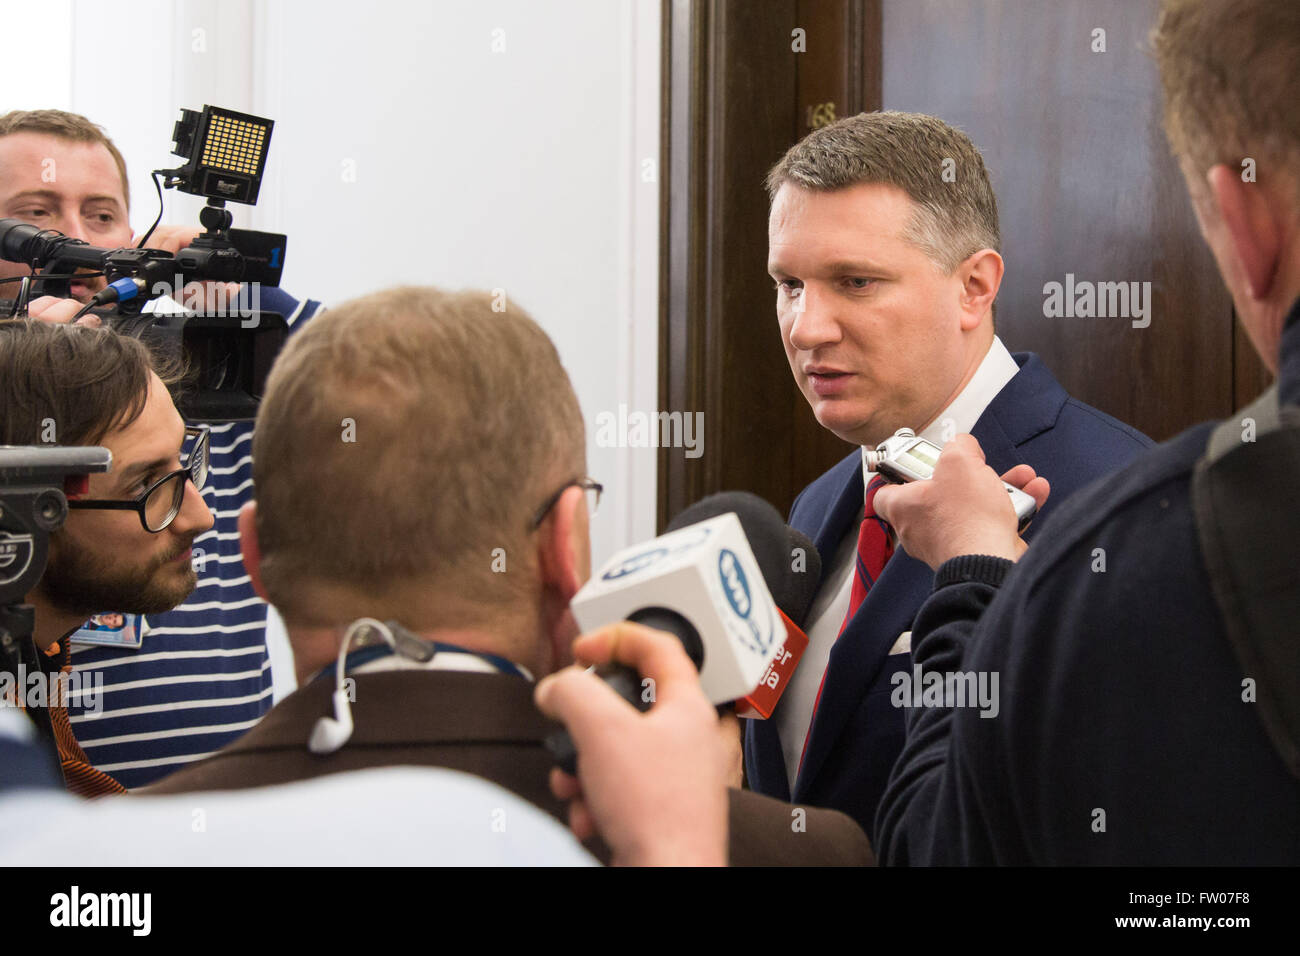 Warsaw, Poland. 31st Mar, 2016. Przemyslaw Wipler from KORWiN party before meeting of leaders of eight polish political parties in a bid to resolve Poland's constitutional crisis. © Mateusz Wlodarczyk/Pacific Press/Alamy Live News Stock Photo